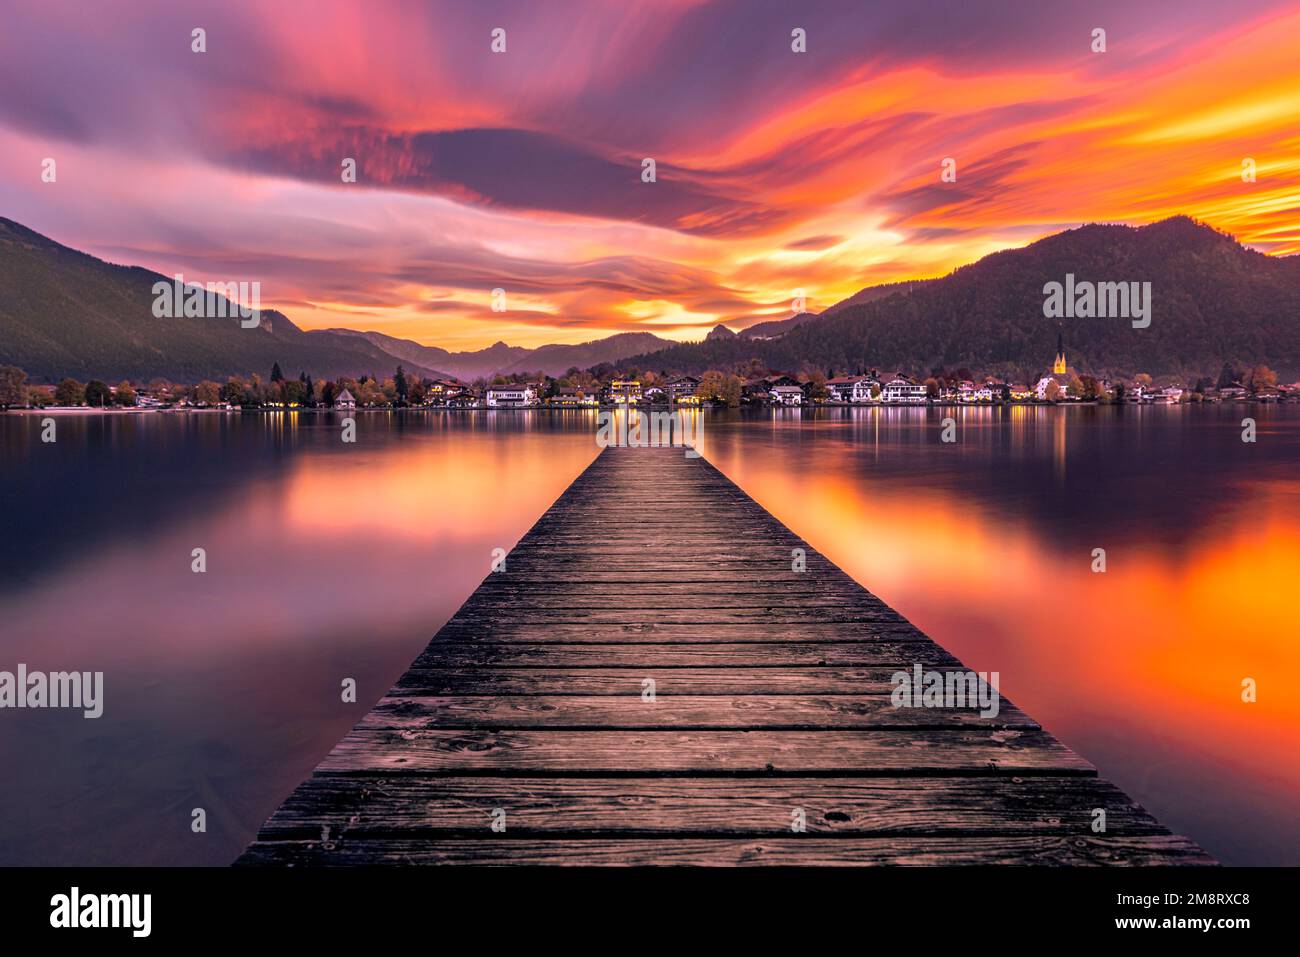 Sonnenuntergang am Tegernsee - Sunset at Tegernsee,long exposure,mystic,sky,clouds Stock Photo